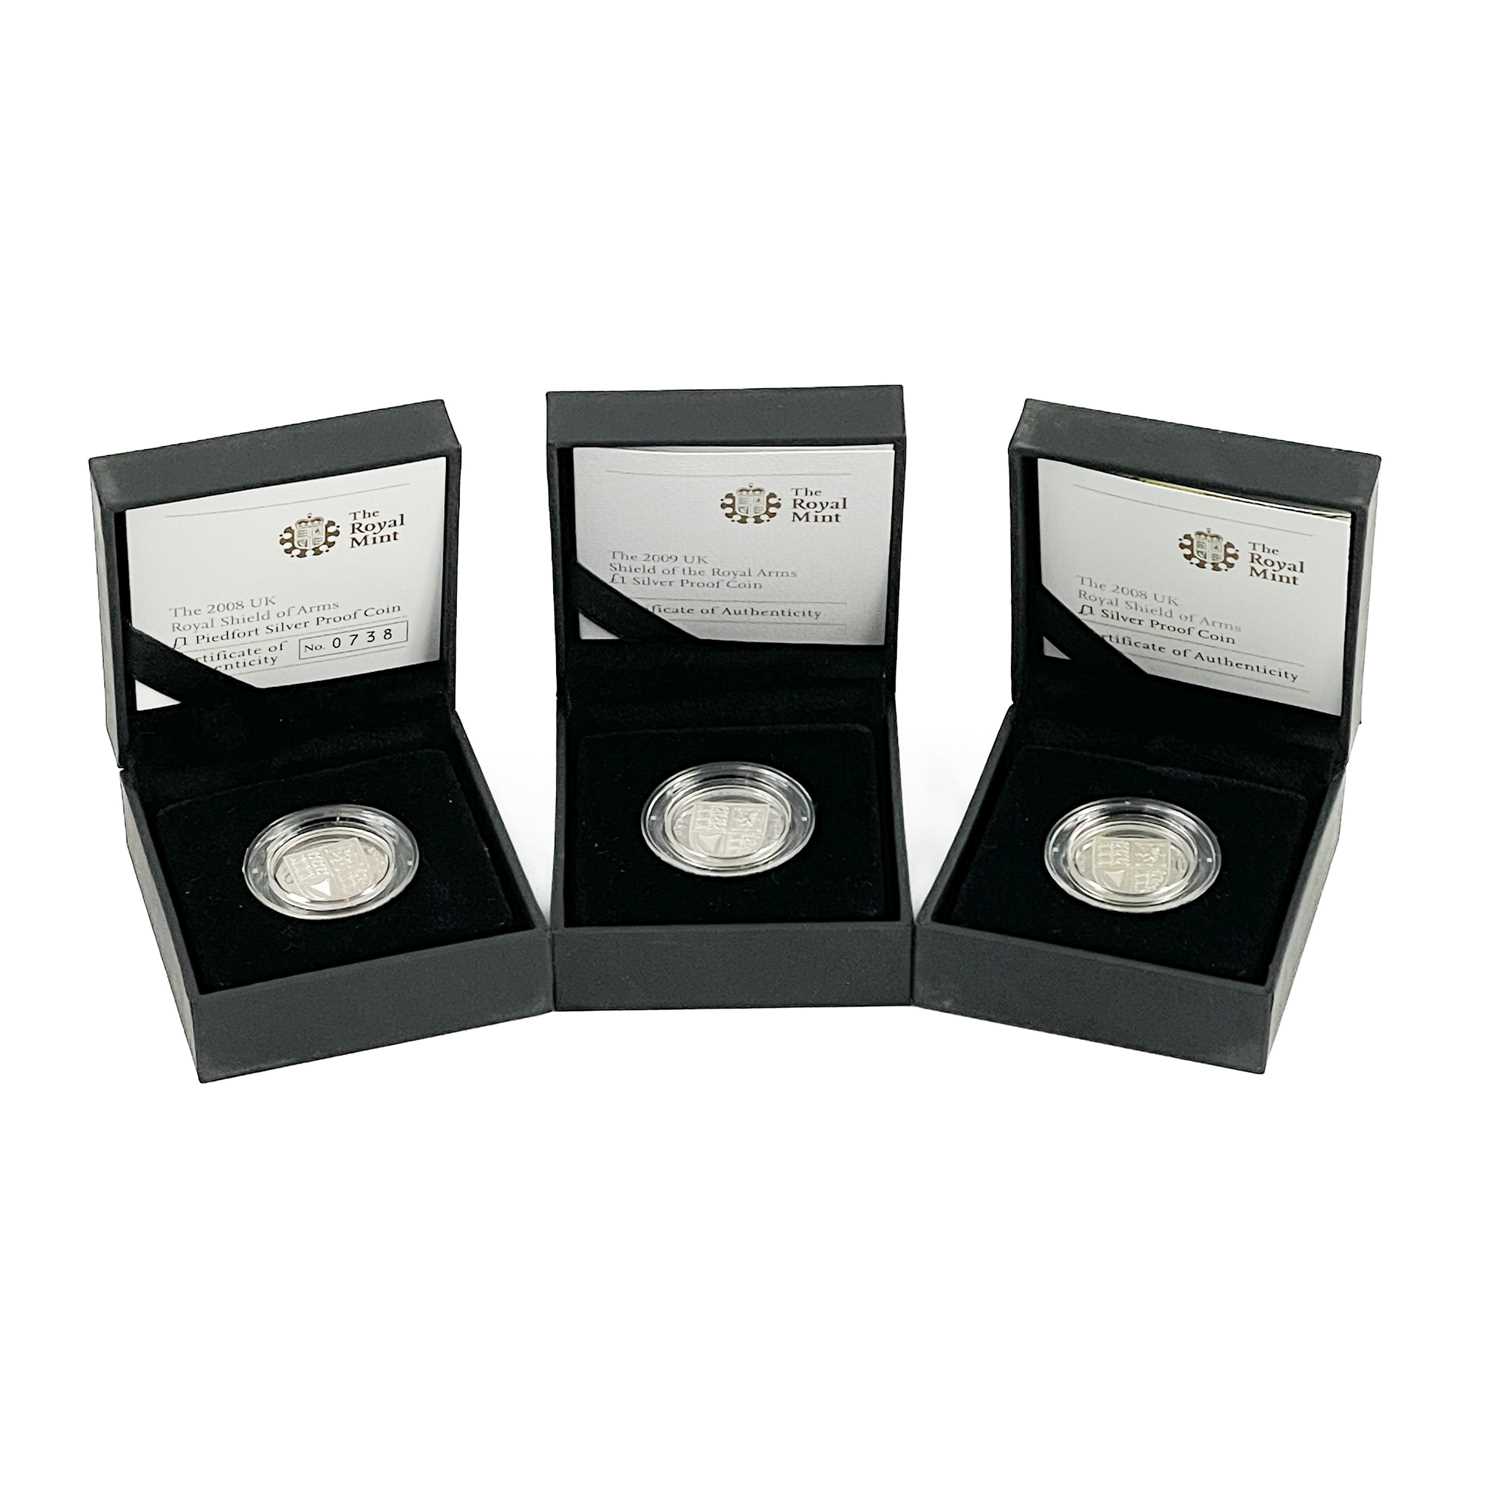 UK Silver Proof £1 Coins 2006 to 2009 (8 coins) in Royal Mint Coin Cases. - Image 5 of 8